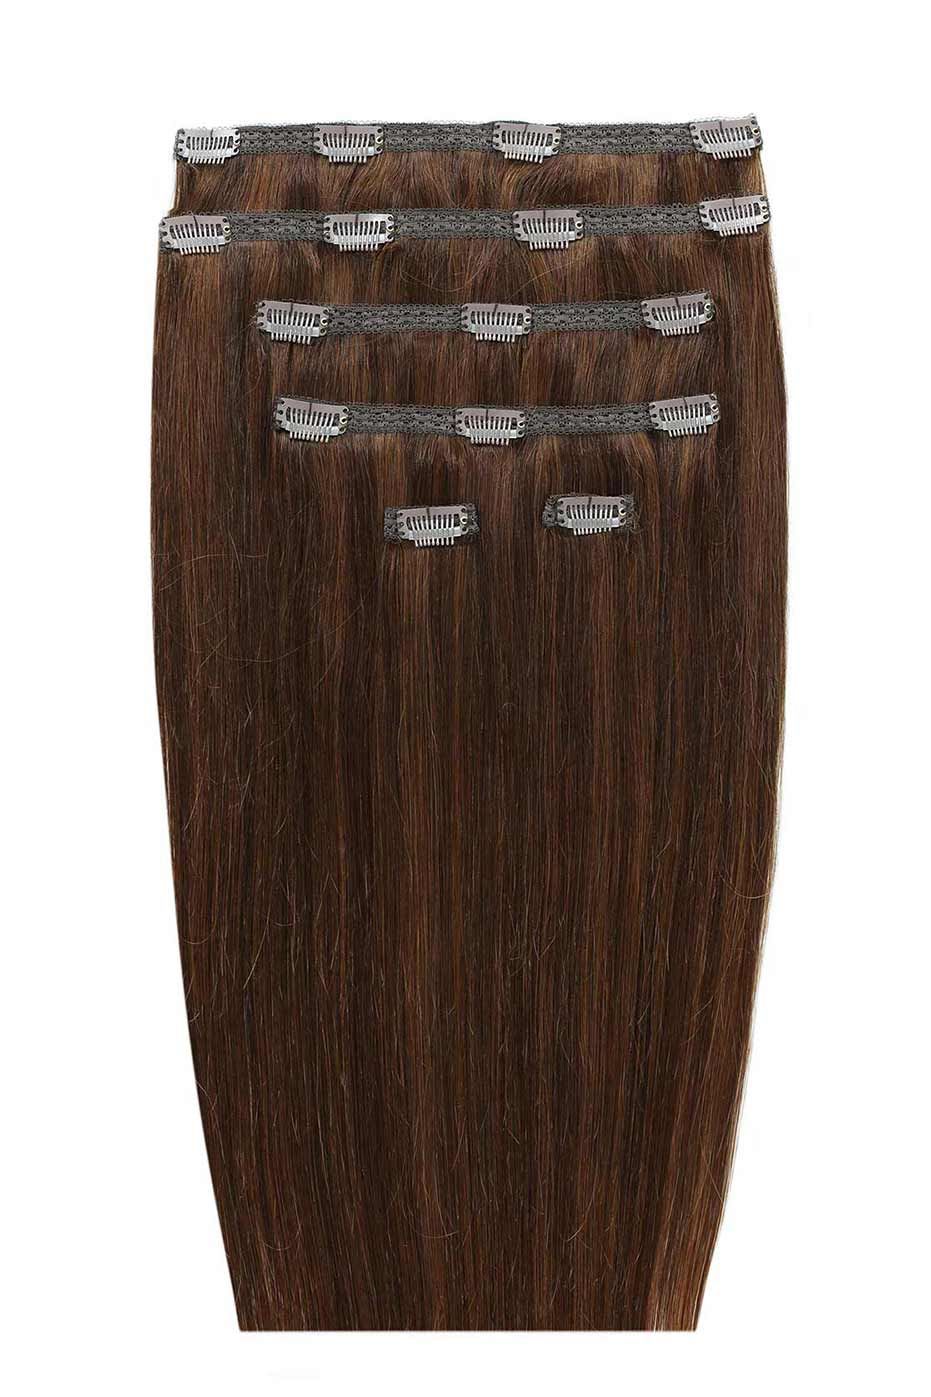 18" Double Hair Set Clip-in Extensions - Hot Toffee